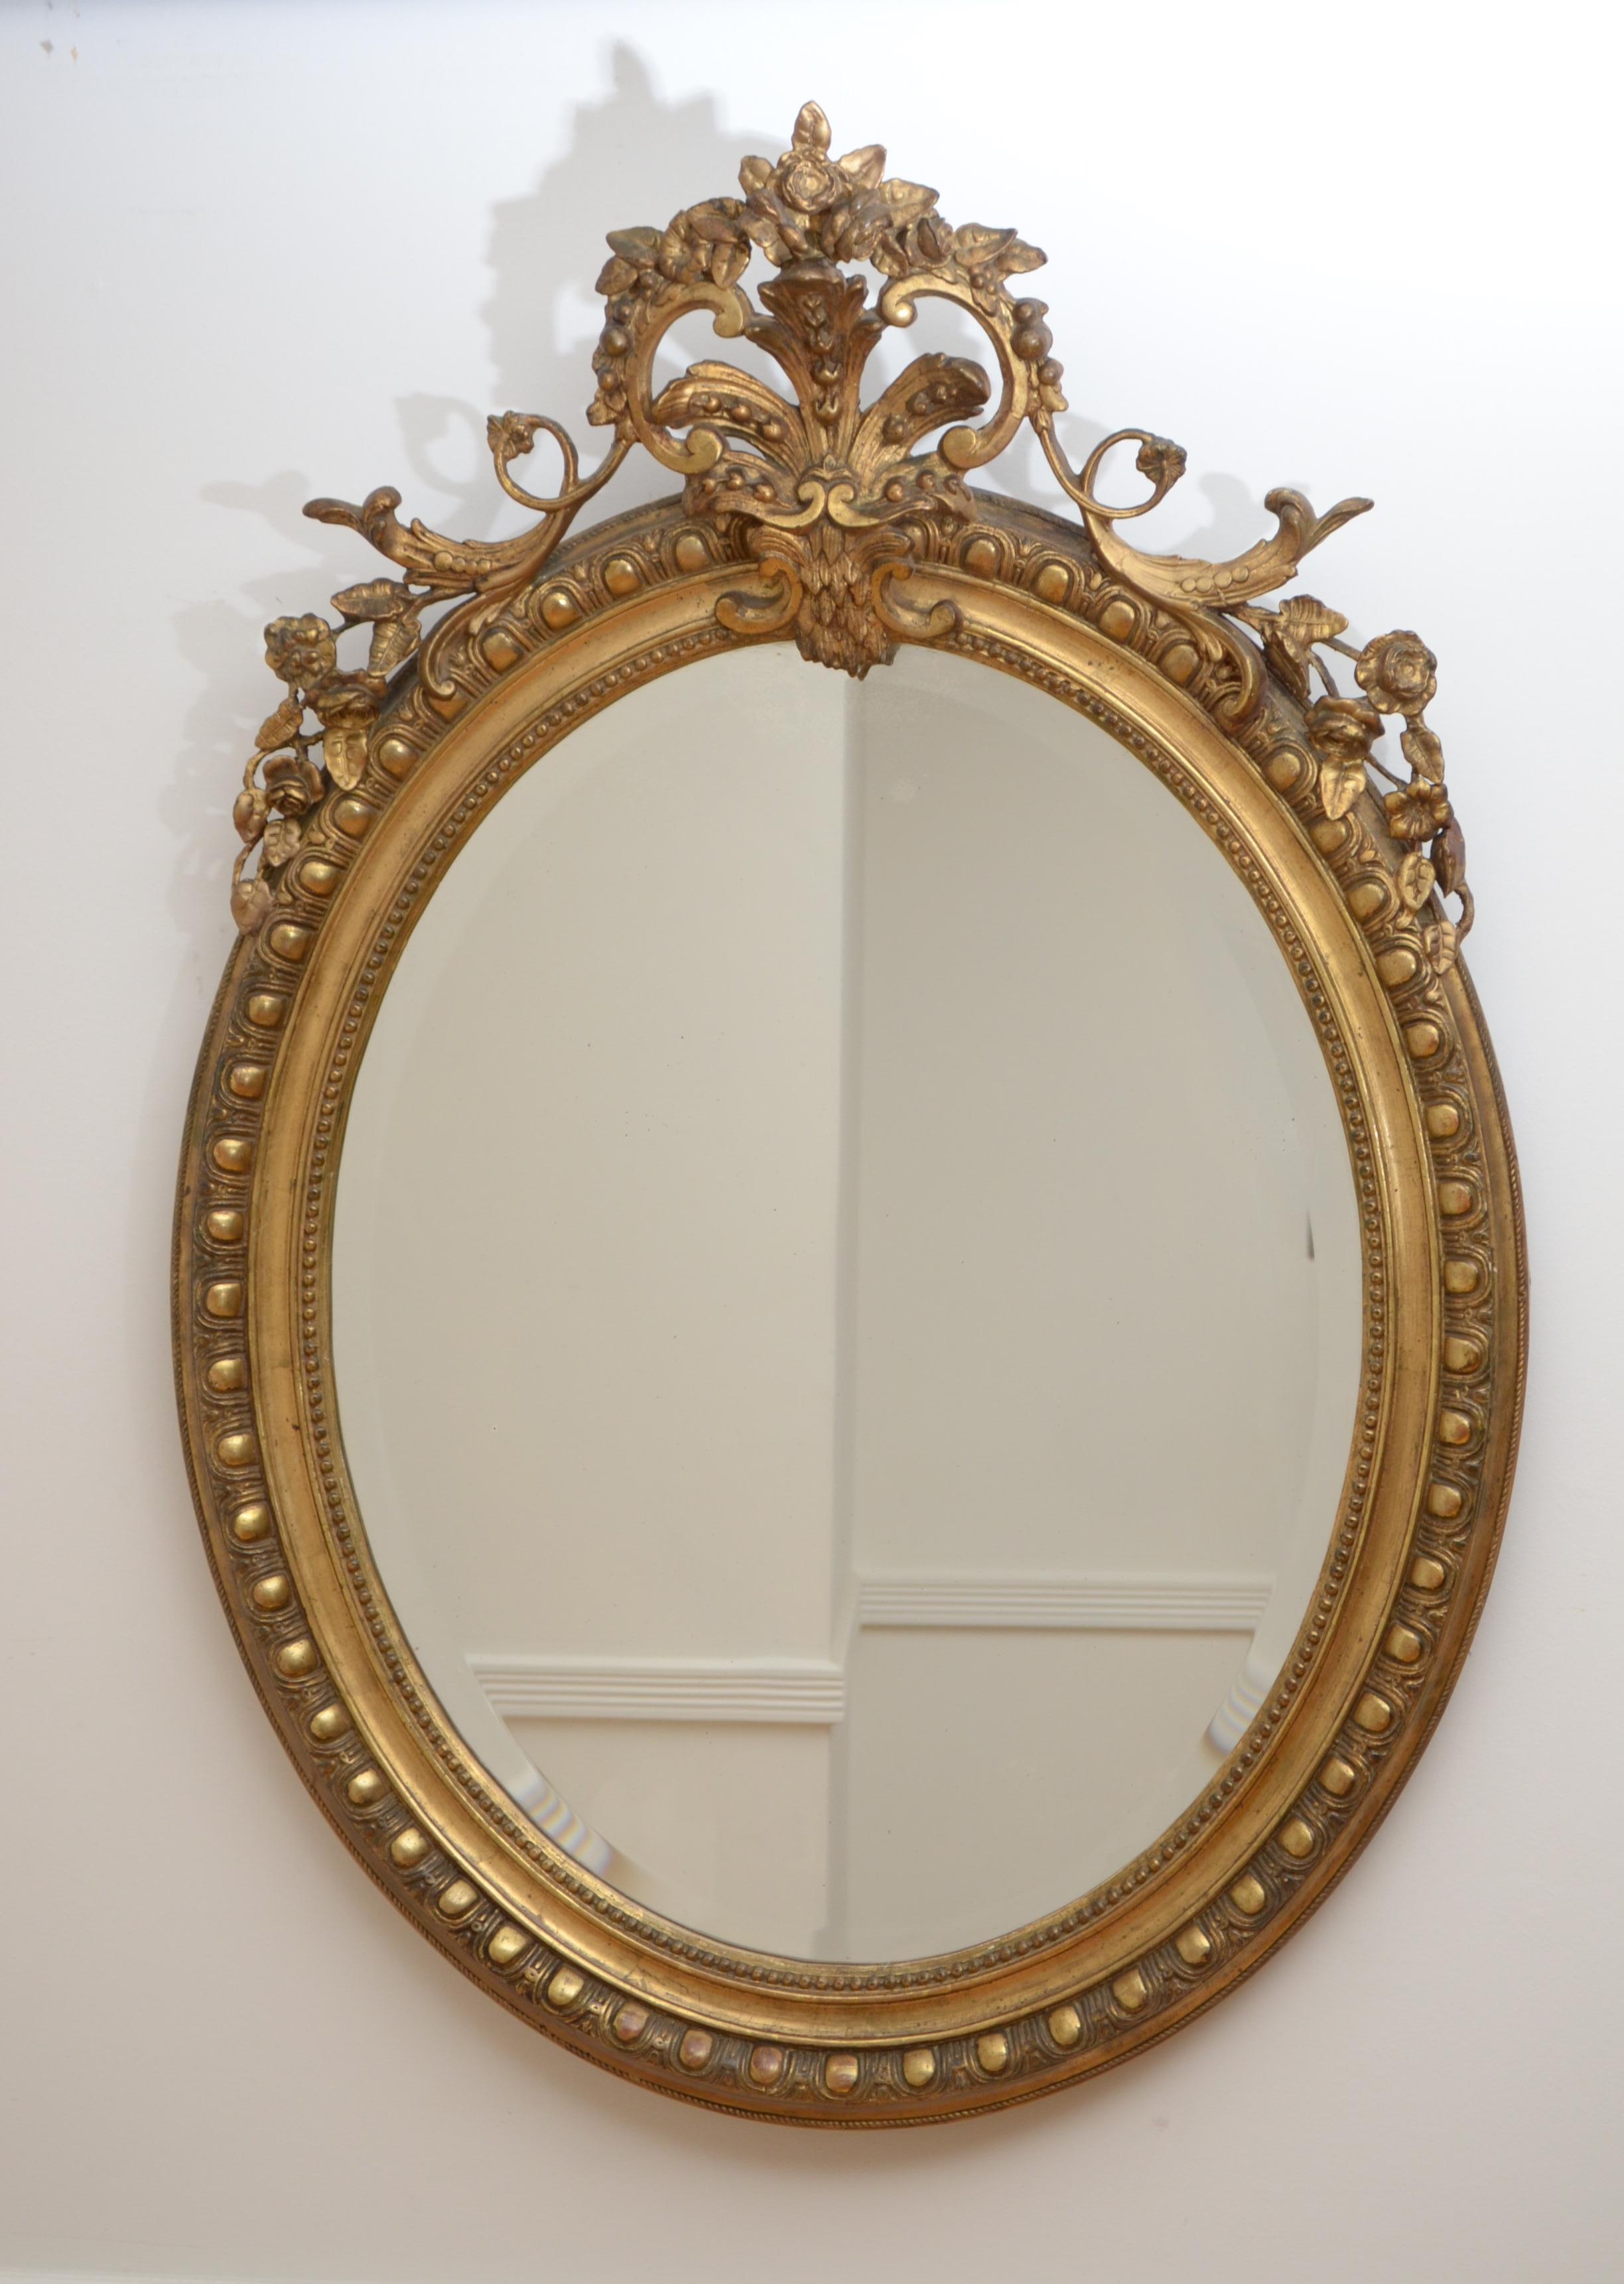 K0066 a superb gilded mirror of oval from, having original bevelled edge glass with some foxing in beautifully beaded and egg and dart carved giltwood frame with floral centre crest to the top. This antique wall mirror retains its original glass,